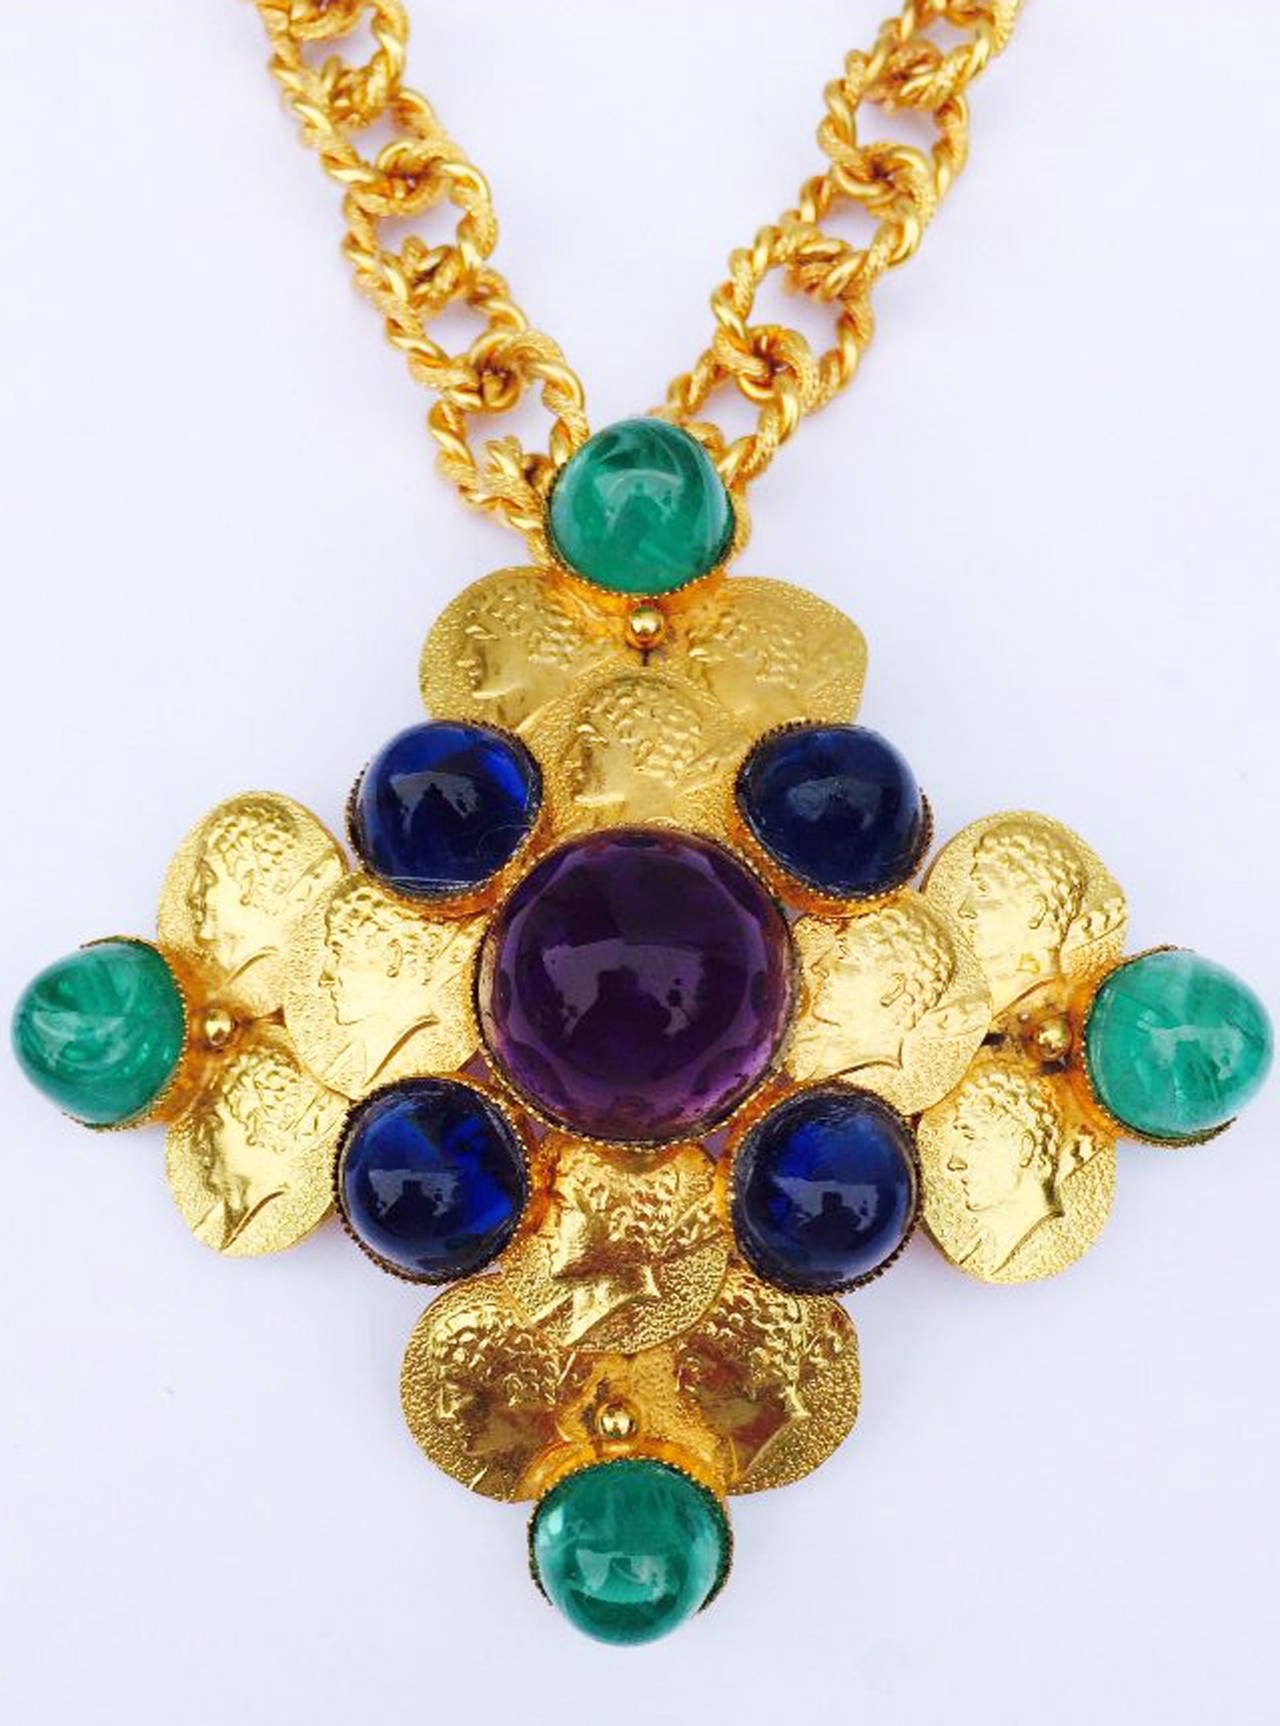 A fine and rare vintage William de Lillo pendant necklace. Signed gilt metal item features a detachable brooch and a 20